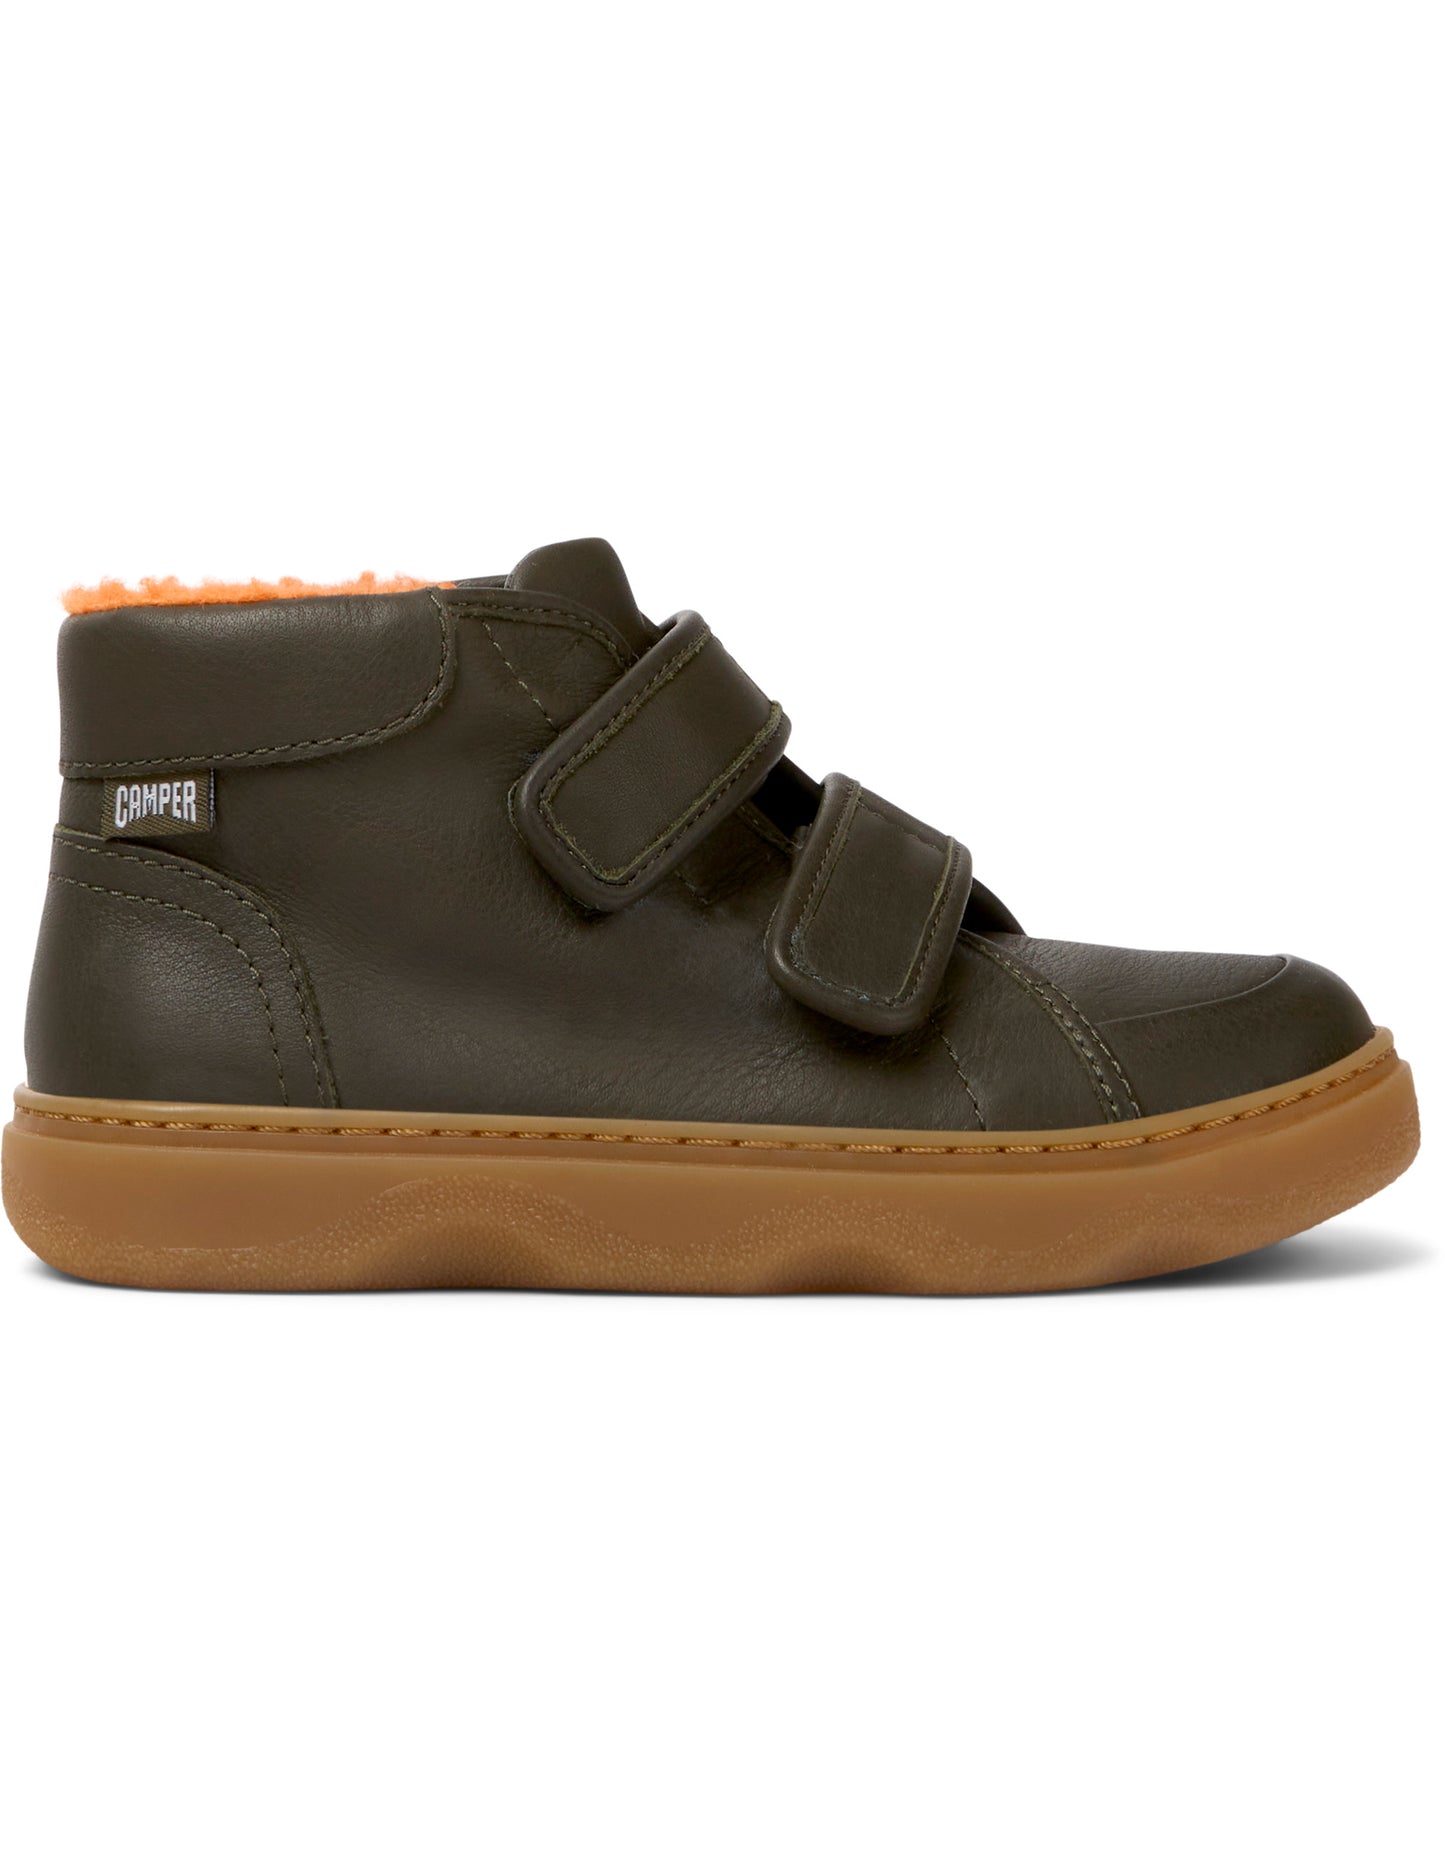 A boys casual ankle boot by Camper, style K900303-004 in brown leather with double velcro fastening. Right side view.